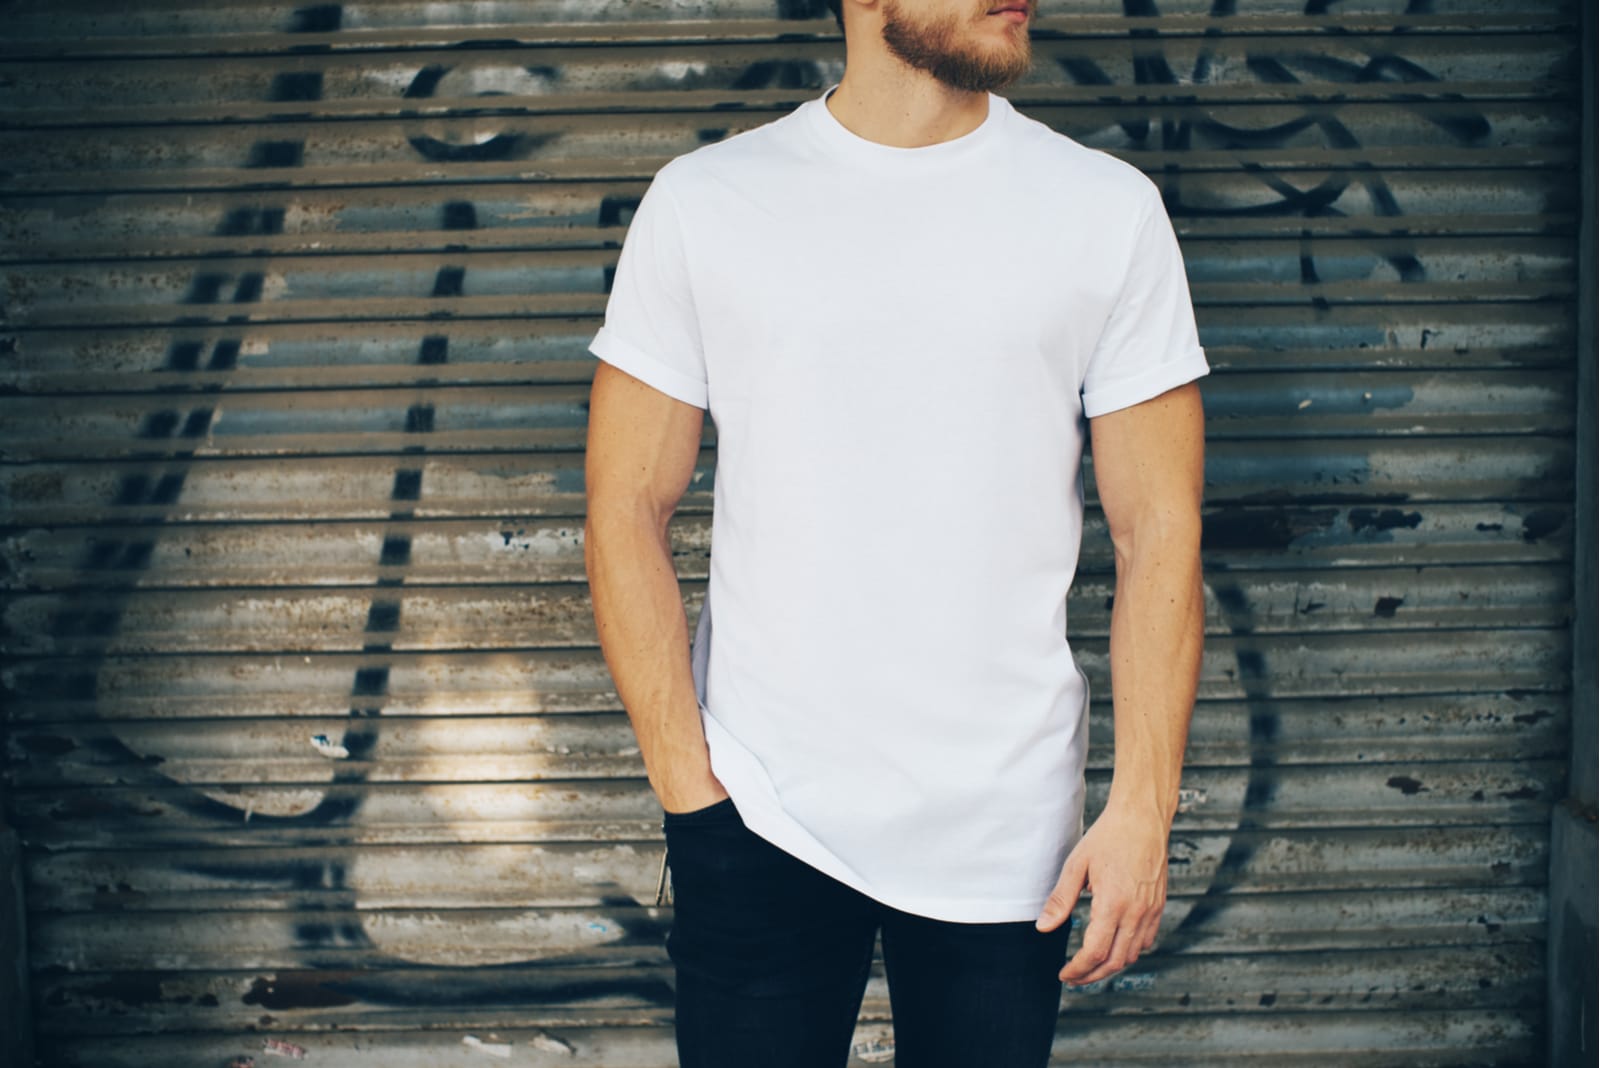 Young man wearing white blank t-shirt and blue jeans